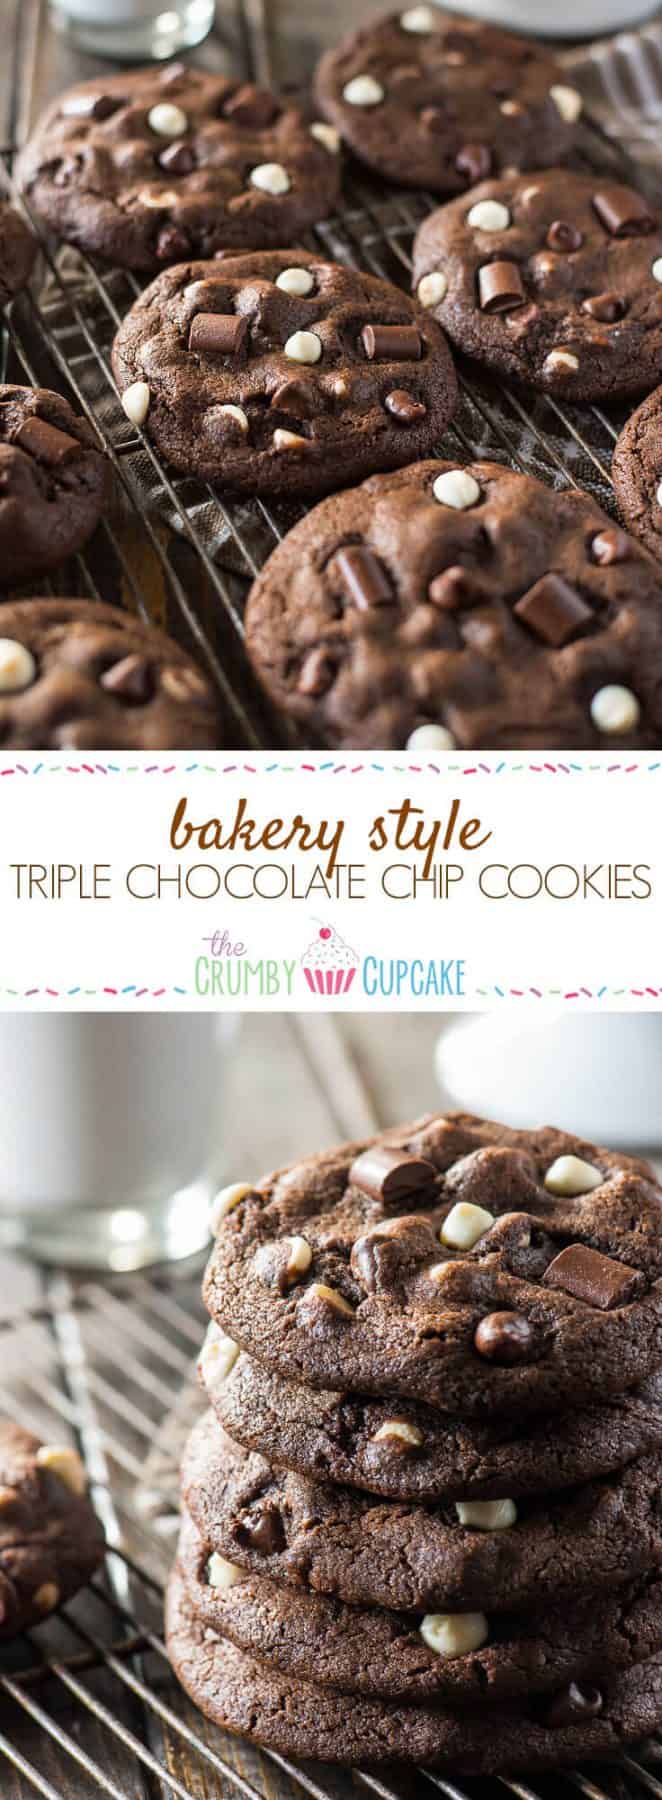 These super soft, extra chewy, totally over-sized Bakery Style Triple Chocolate Chip Cookies are about to become the new best friend to your next glass of milk!